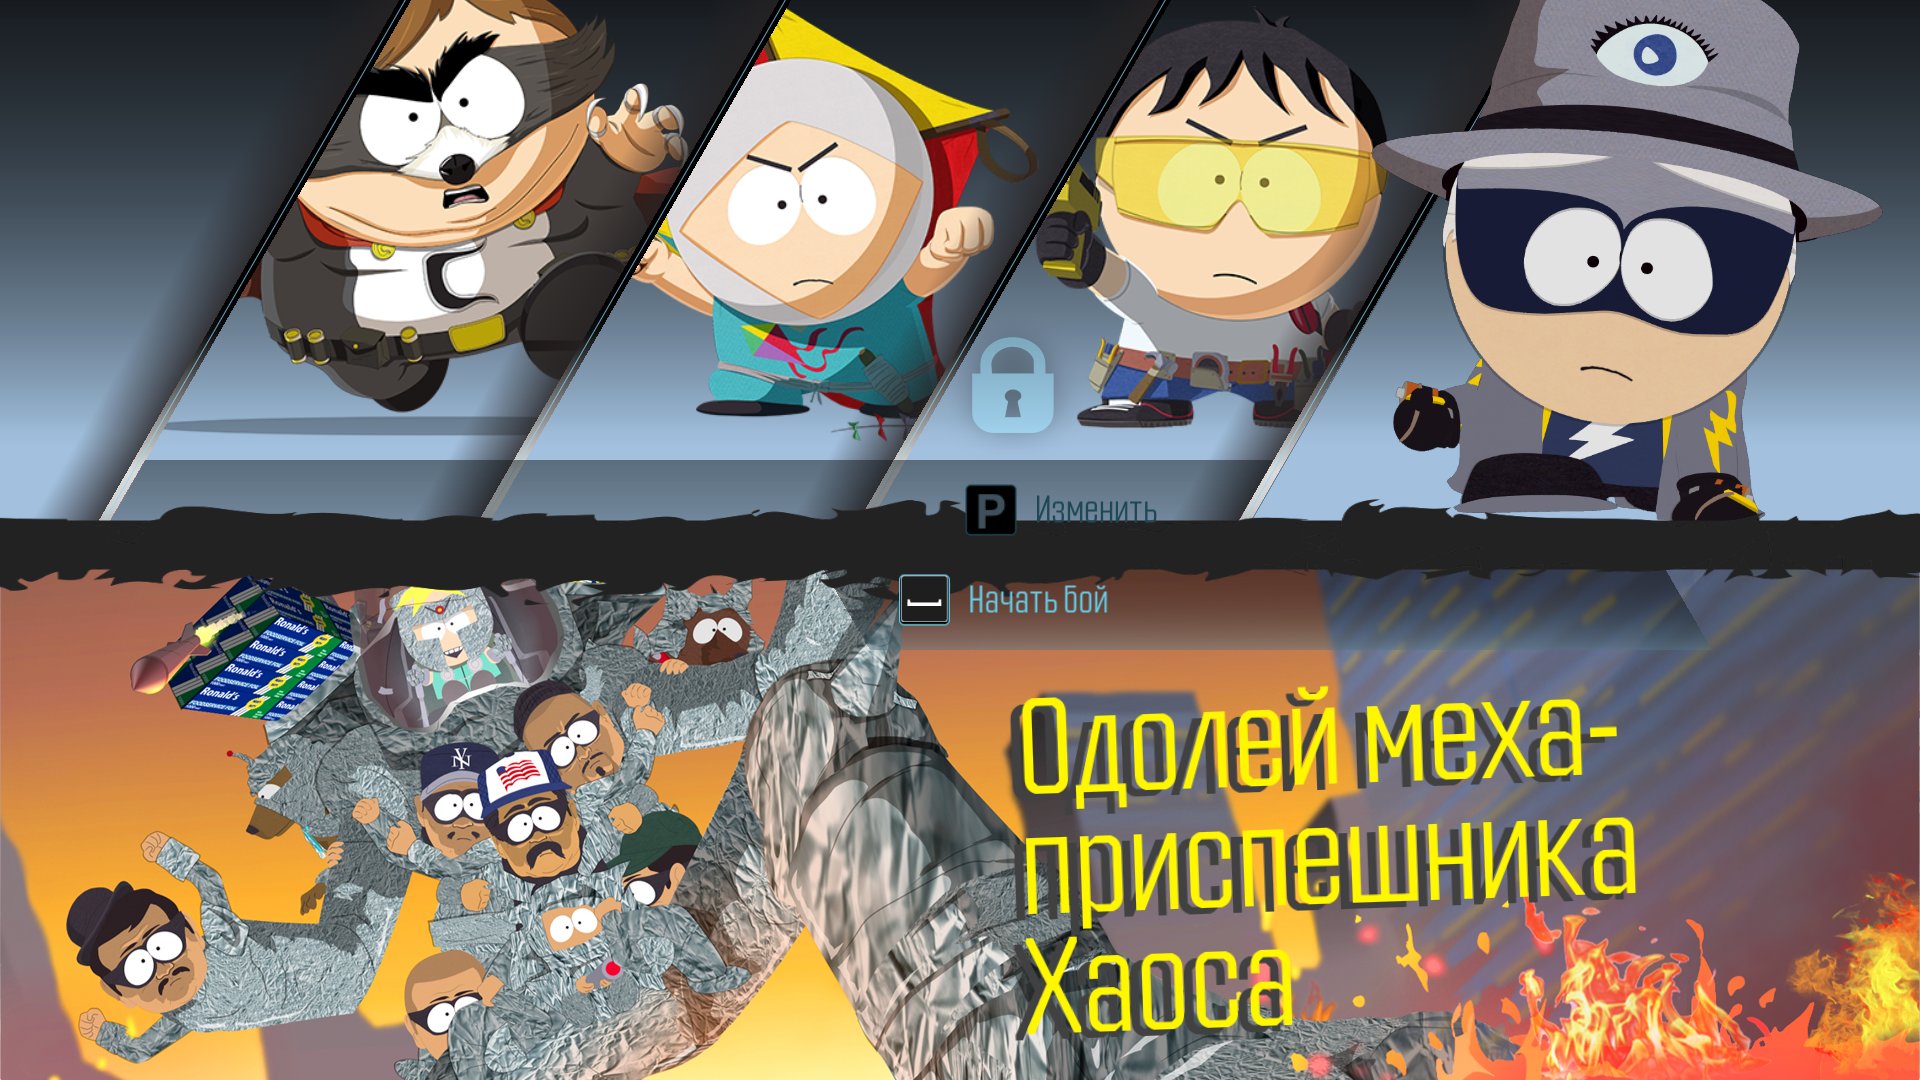 South park the fractured but whole купить ключ steam дешево фото 31